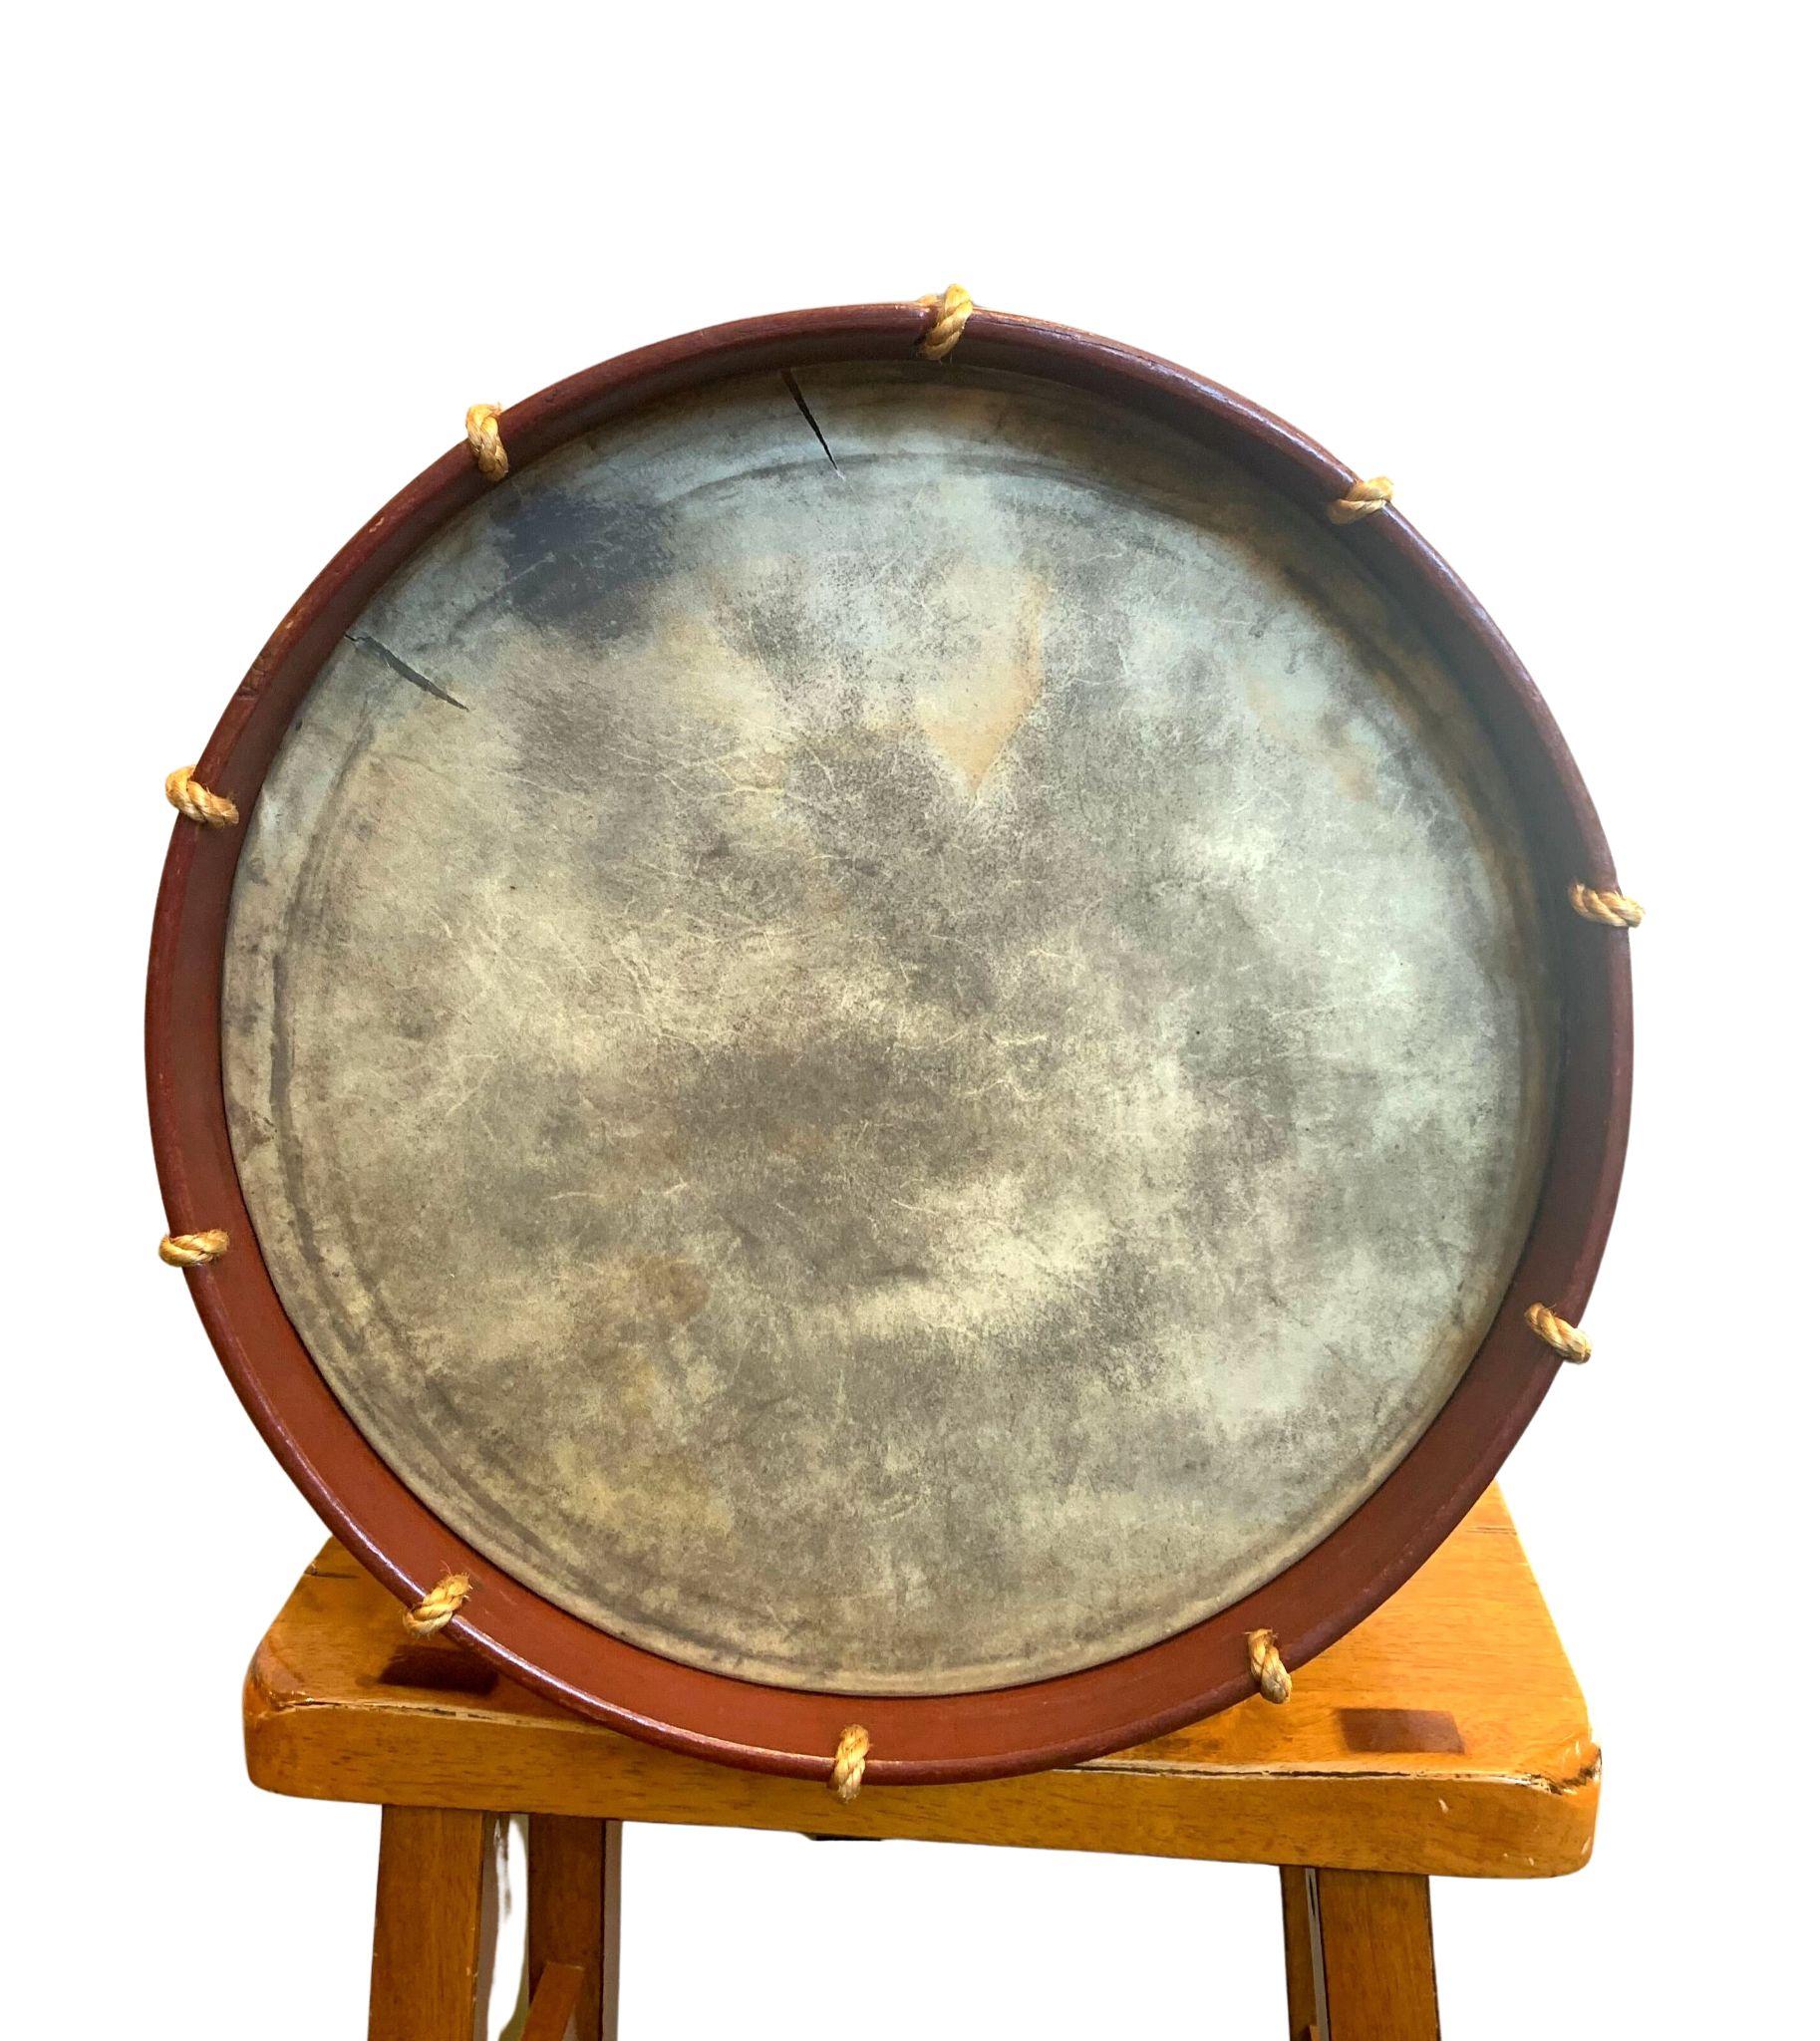 Stained Civil War-Era Side Drum, Made by George Kilbourn, 1859 For Sale